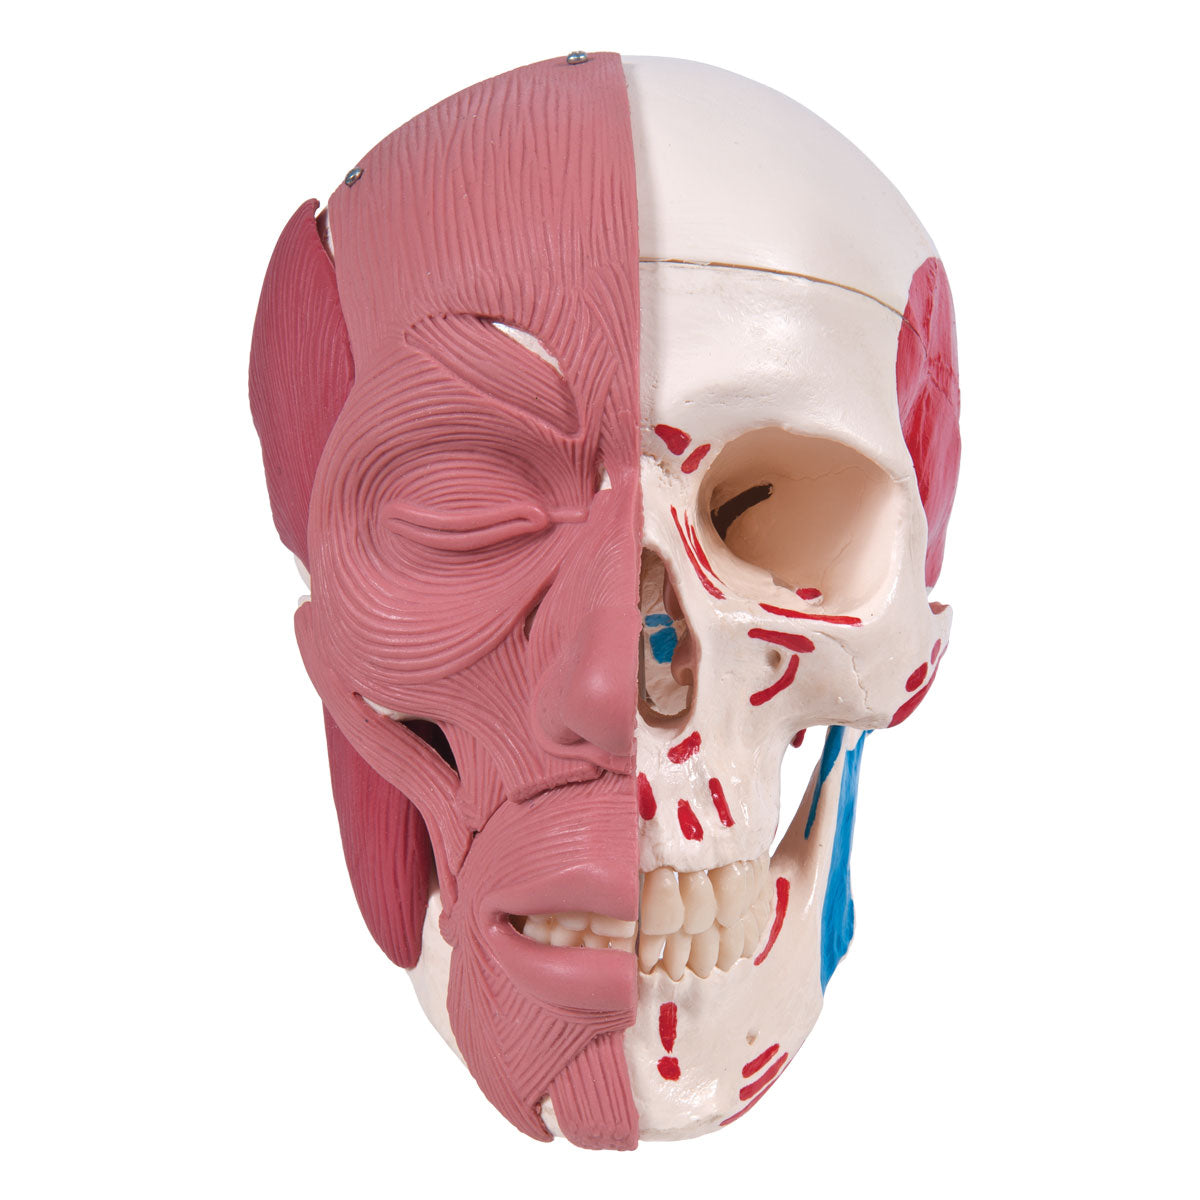 A300 Human Skull with Facial Muscles - 3B Smart Anatomy